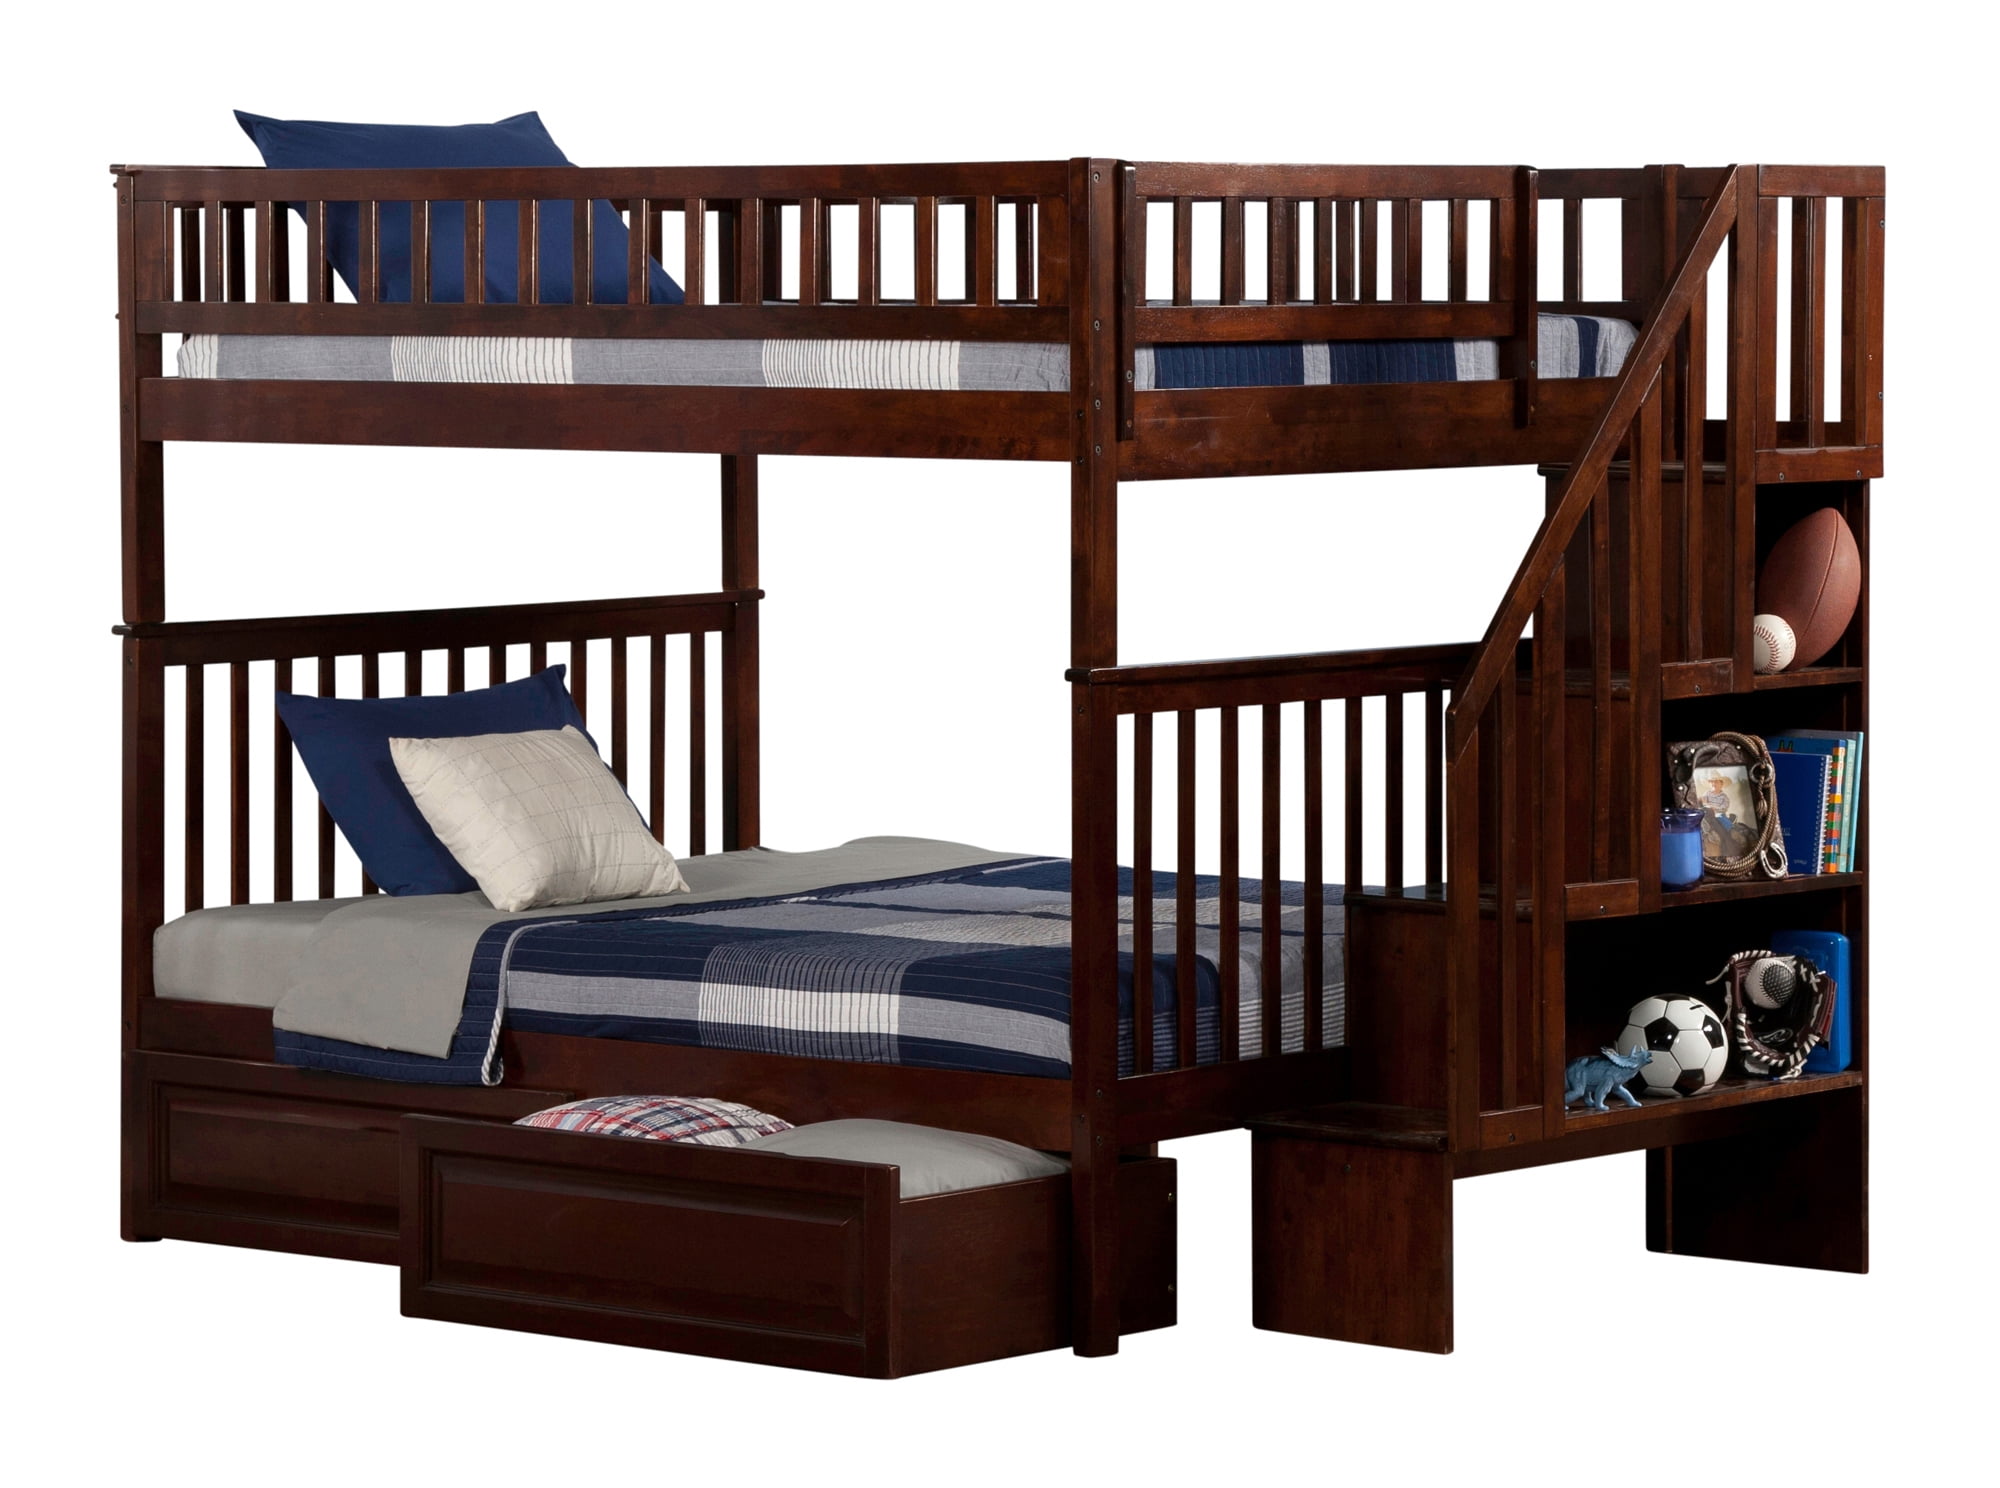 Ab56824 Woodland Staircase Bunk Bed With Rpbd, Antique Walnut - Full & Full